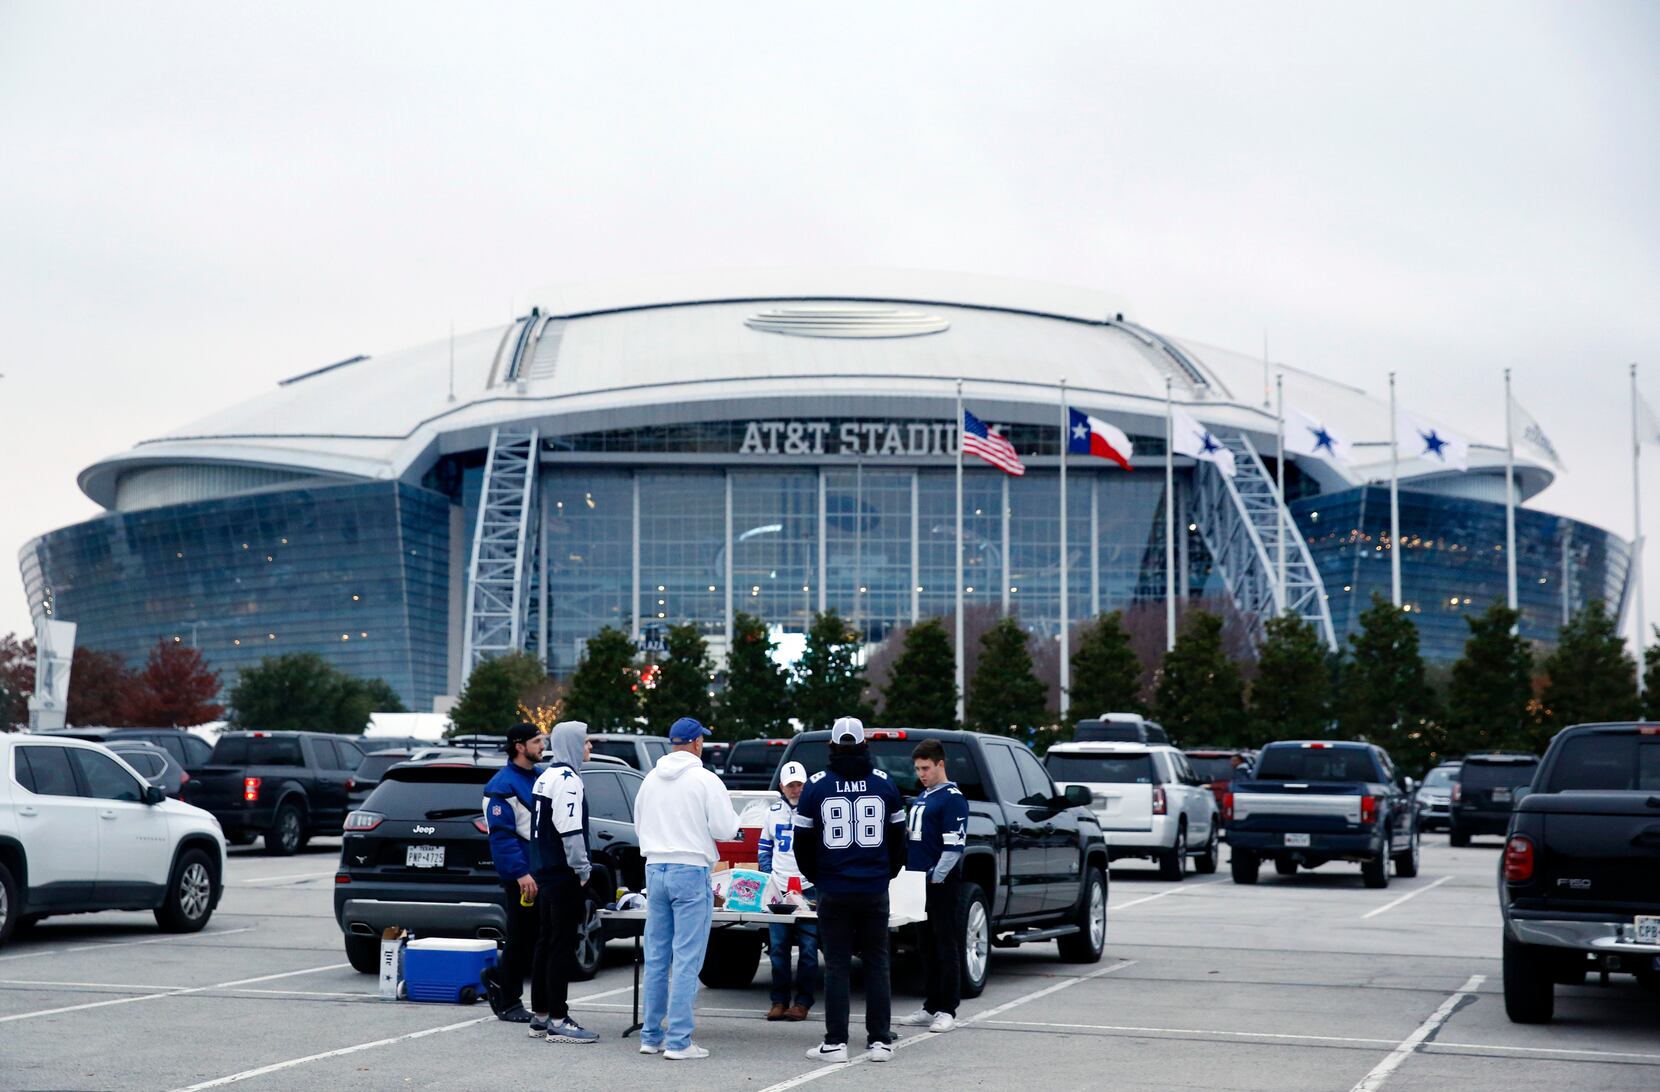 $295 million renovations planned for AT&T Stadium ahead of 2026 World Cup